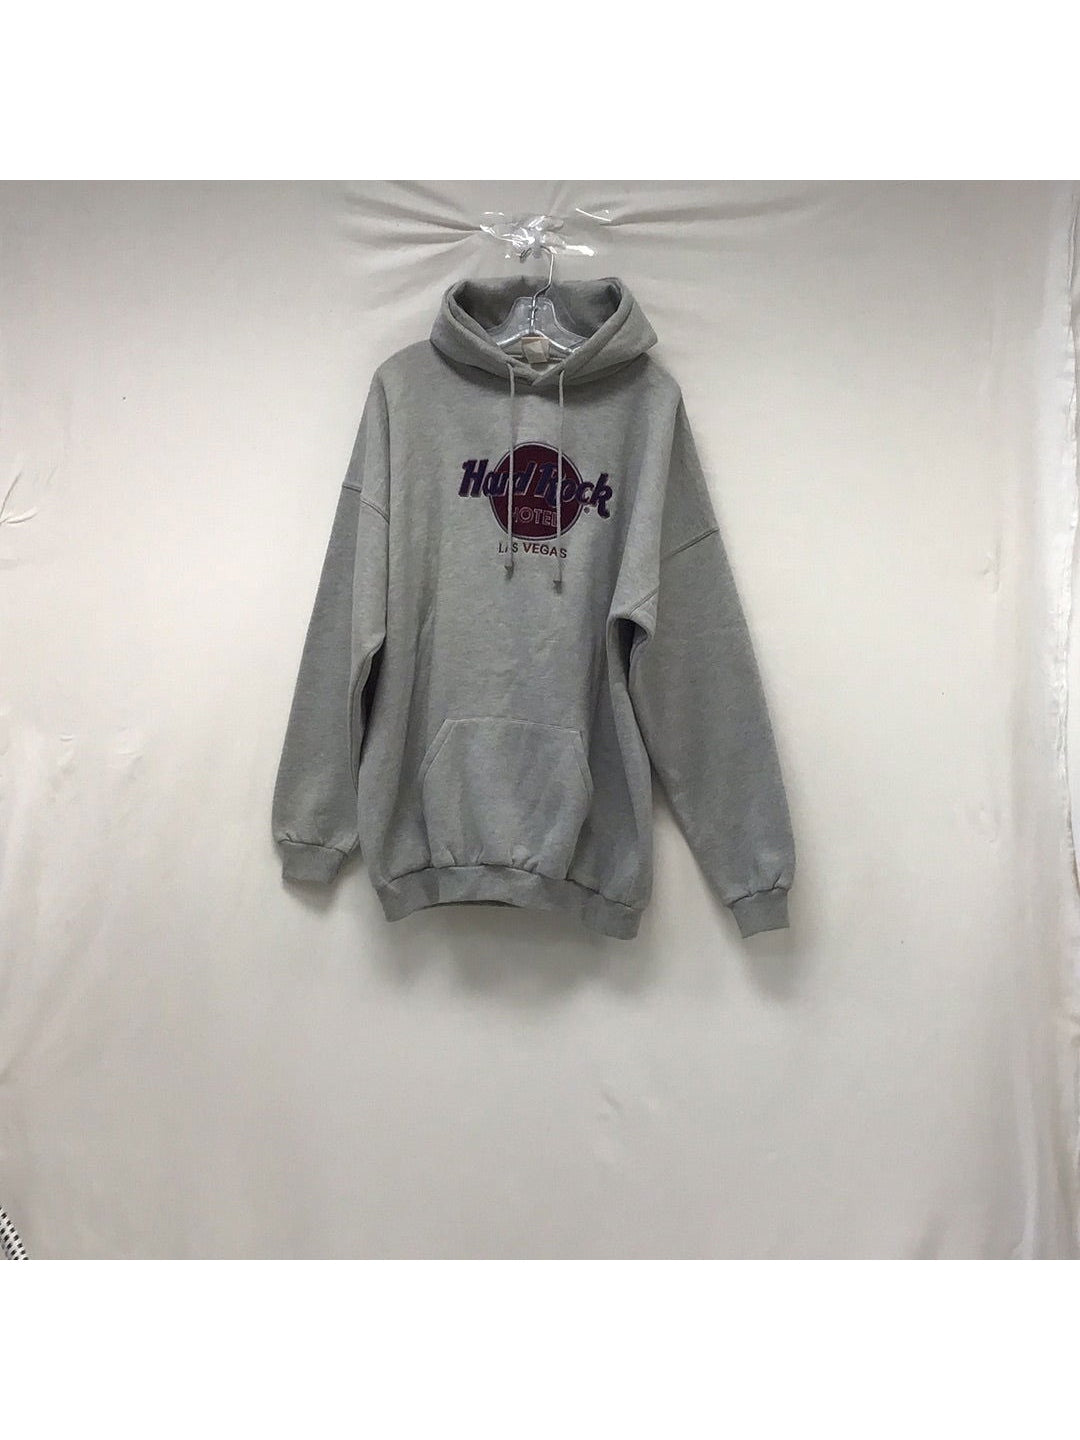 Hard Rock Hotel Men Xl Gray Hoodie - The Kennedy Collective Thrift - 